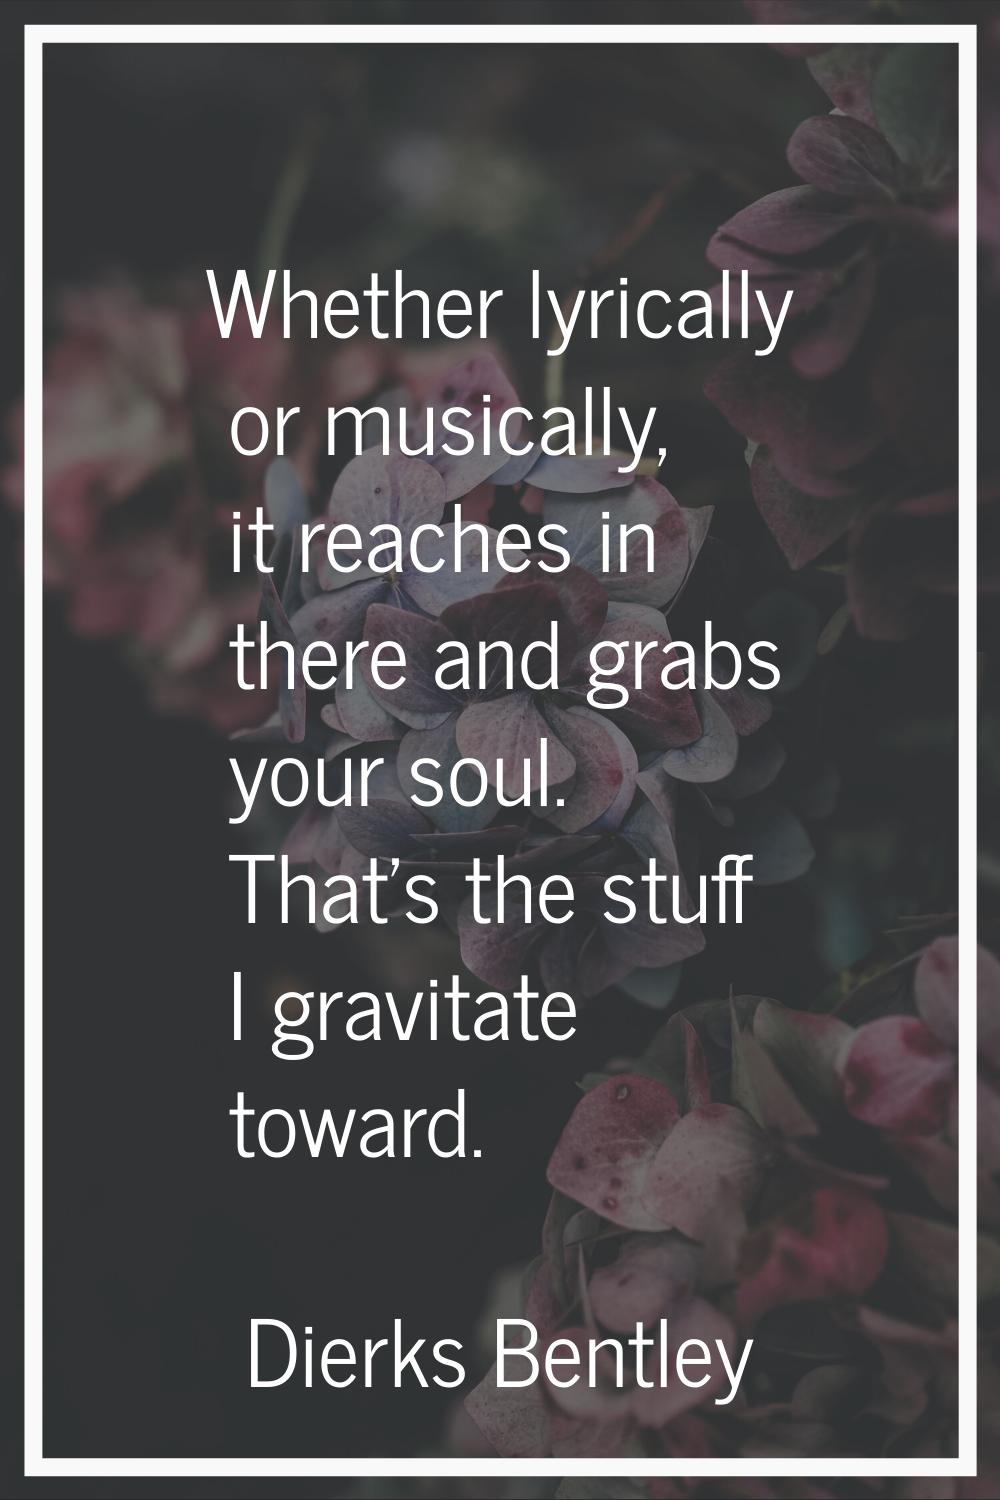 Whether lyrically or musically, it reaches in there and grabs your soul. That's the stuff I gravita